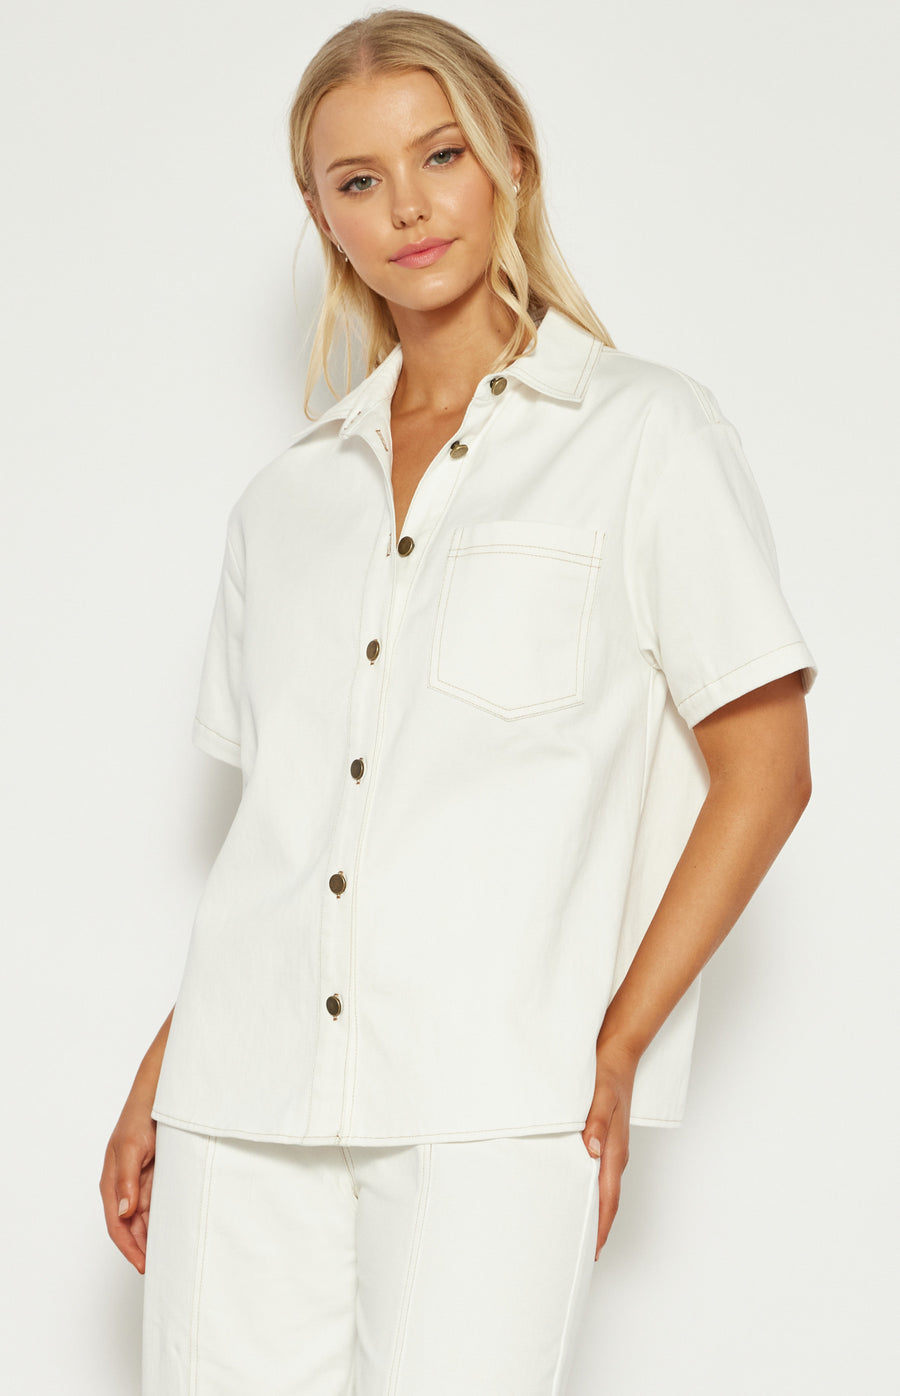 W&C - Cotton Button Up Shirt with Contrast Stitching